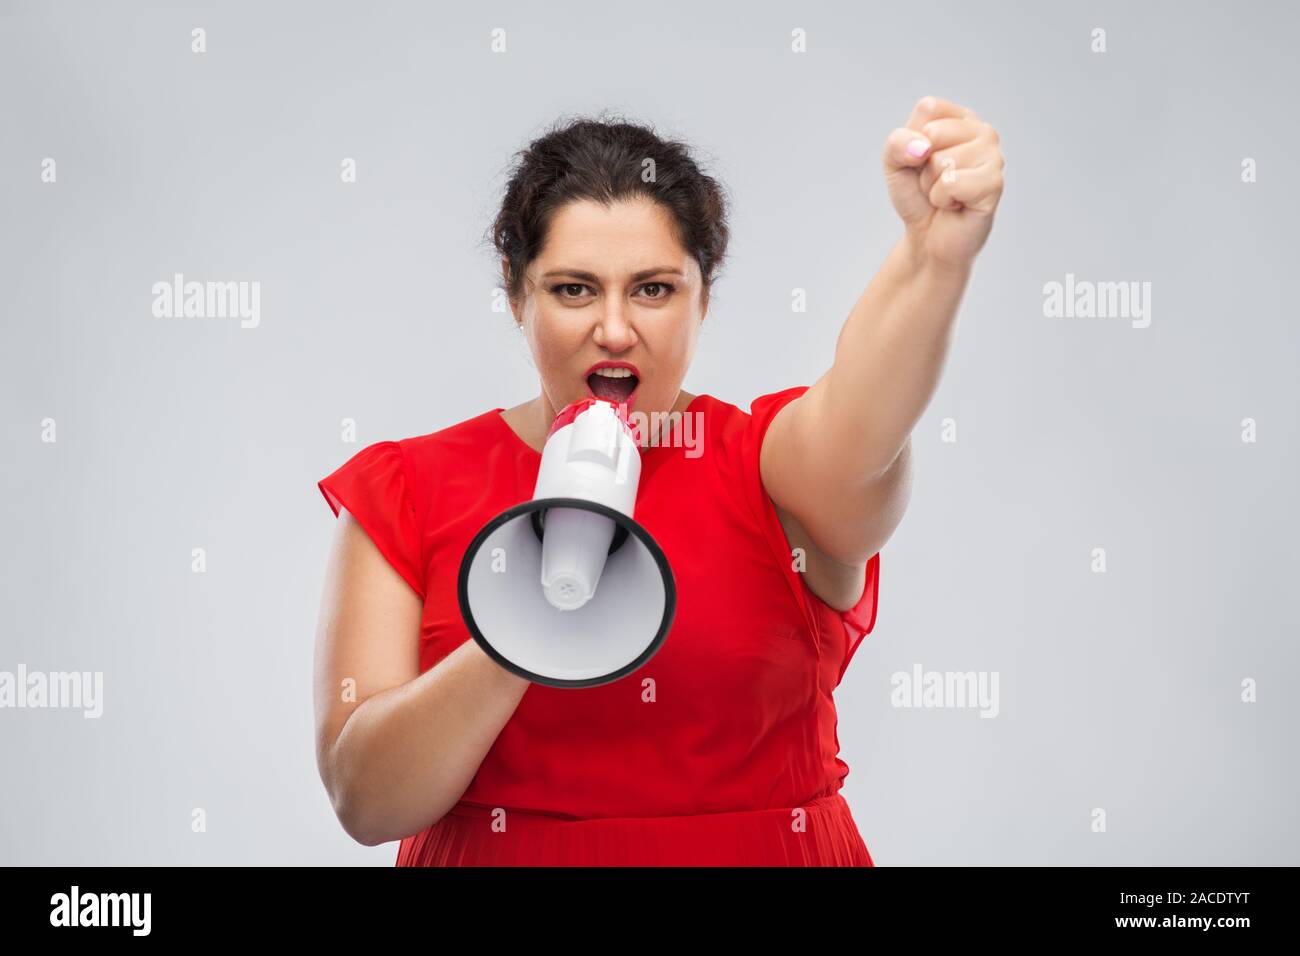 woman in red dress speaking to megaphone Stock Photo